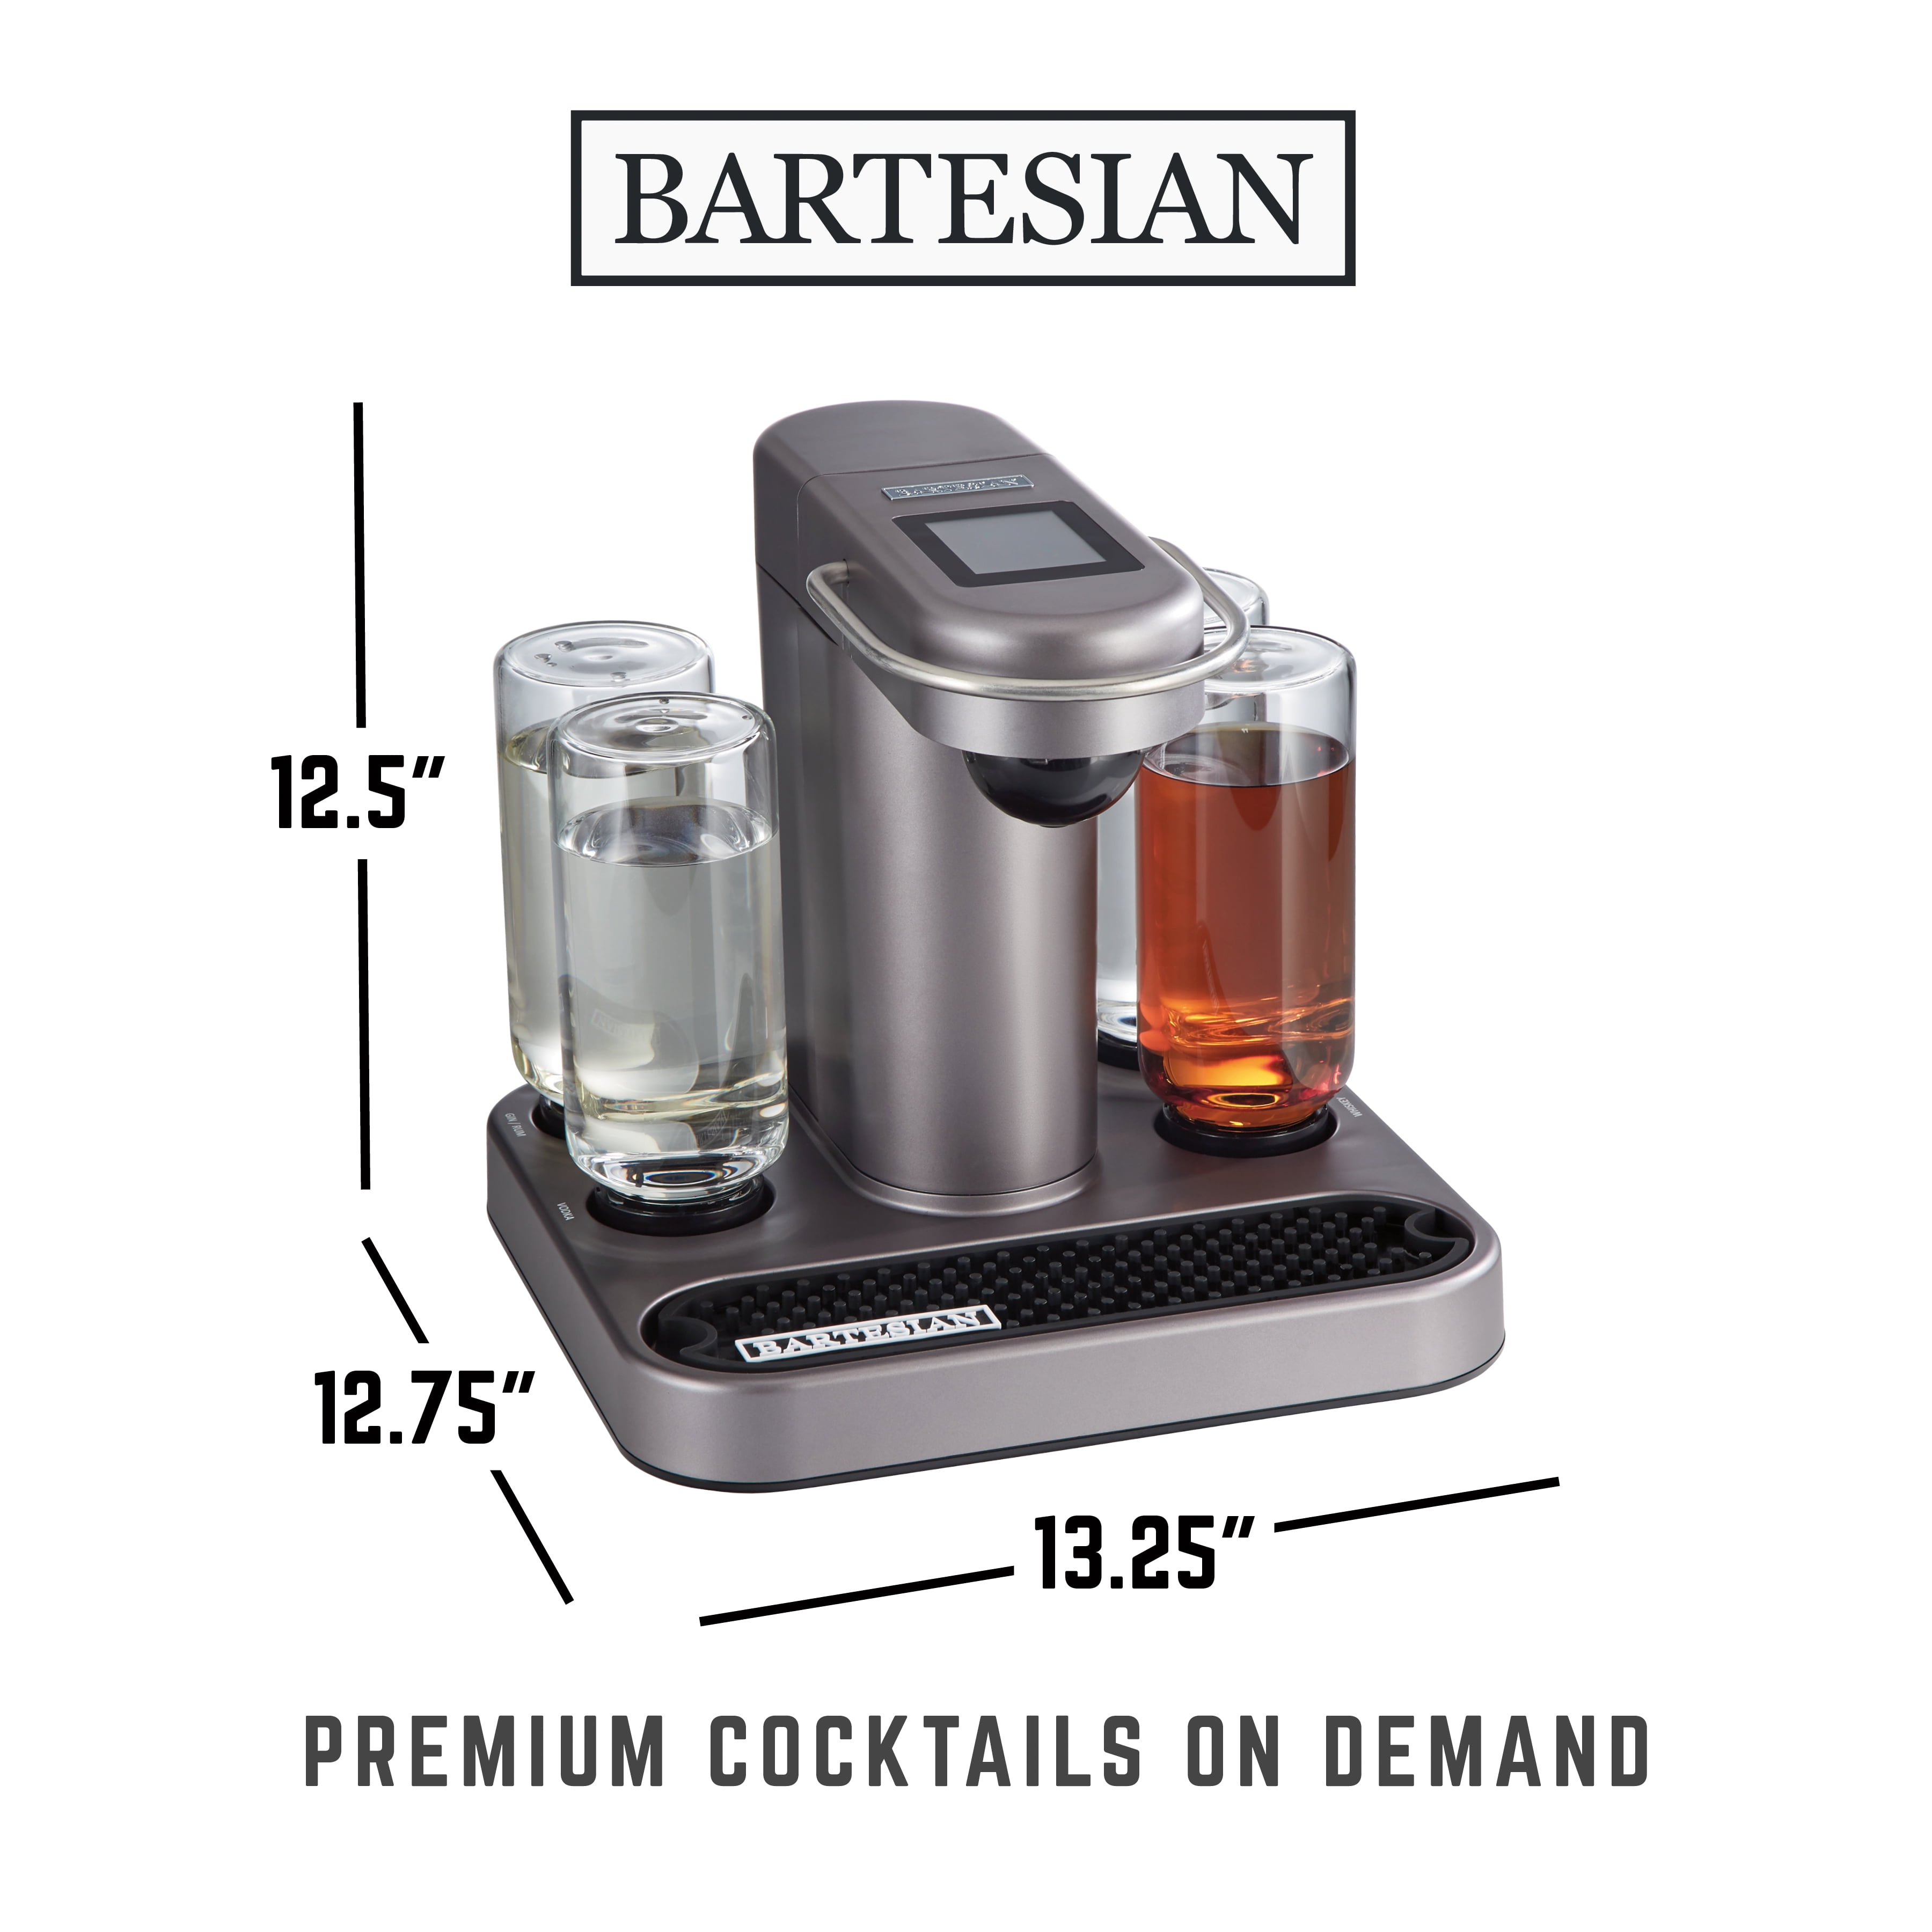  Bartesian Stainless Steel Cocktail Shaker - 16 Ounce Bartender Cocktails  Shakers Bar Accessories for the Home - Bartending Mixology Barware Mixer  Cup - Professional Mixed Drink Shaker Utensil Tool: Home & Kitchen